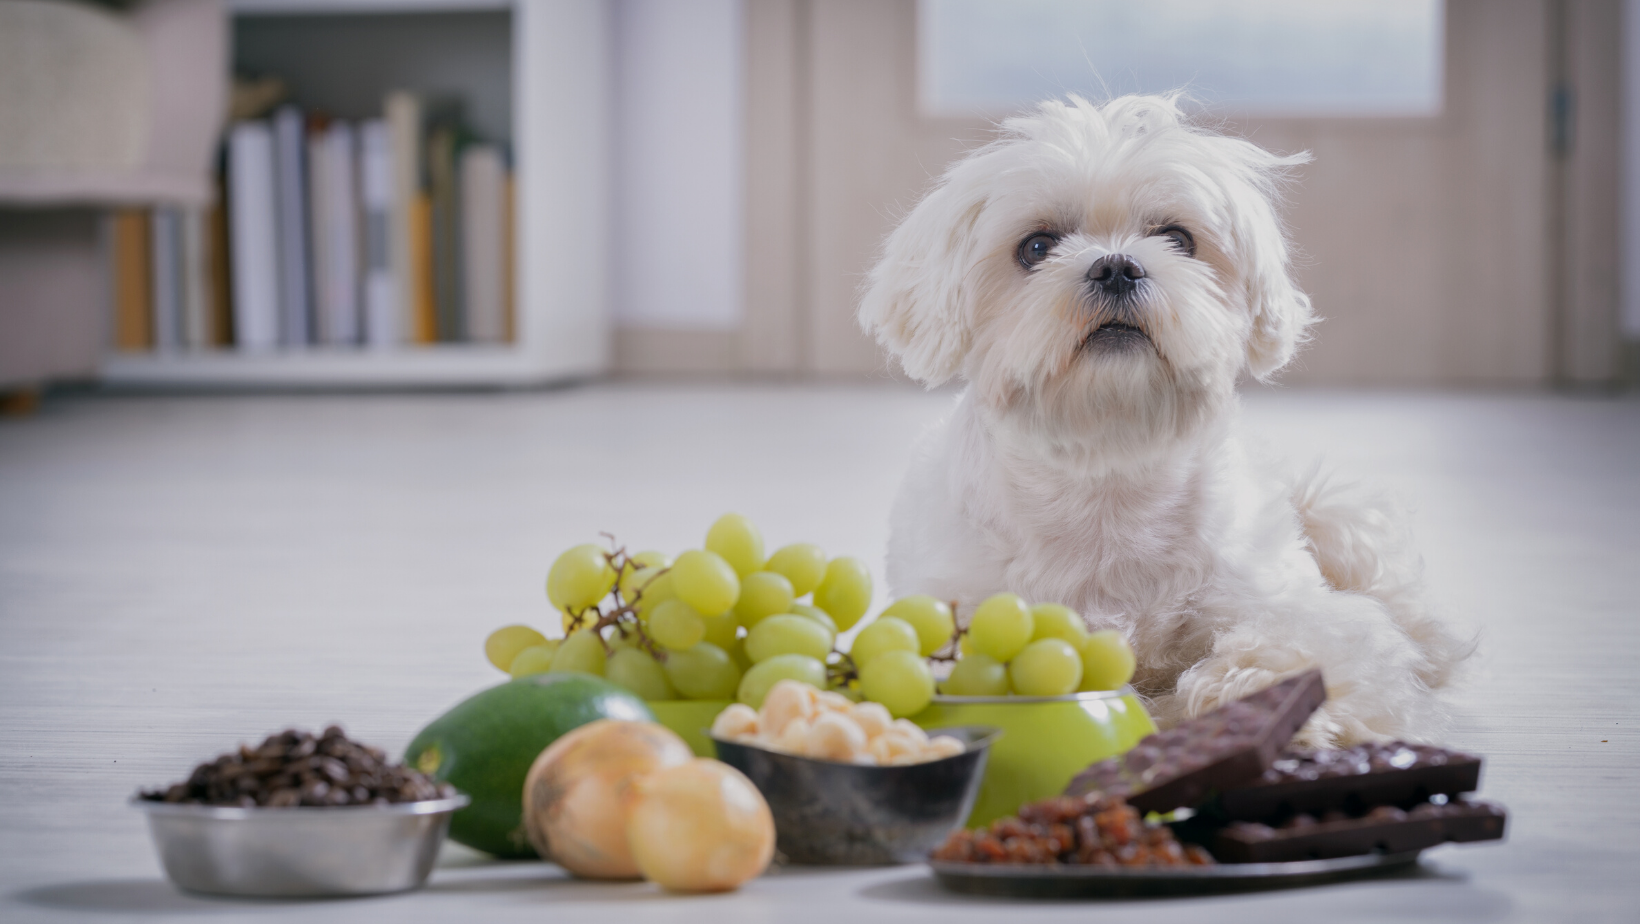 Fix the diet of your dog to help him